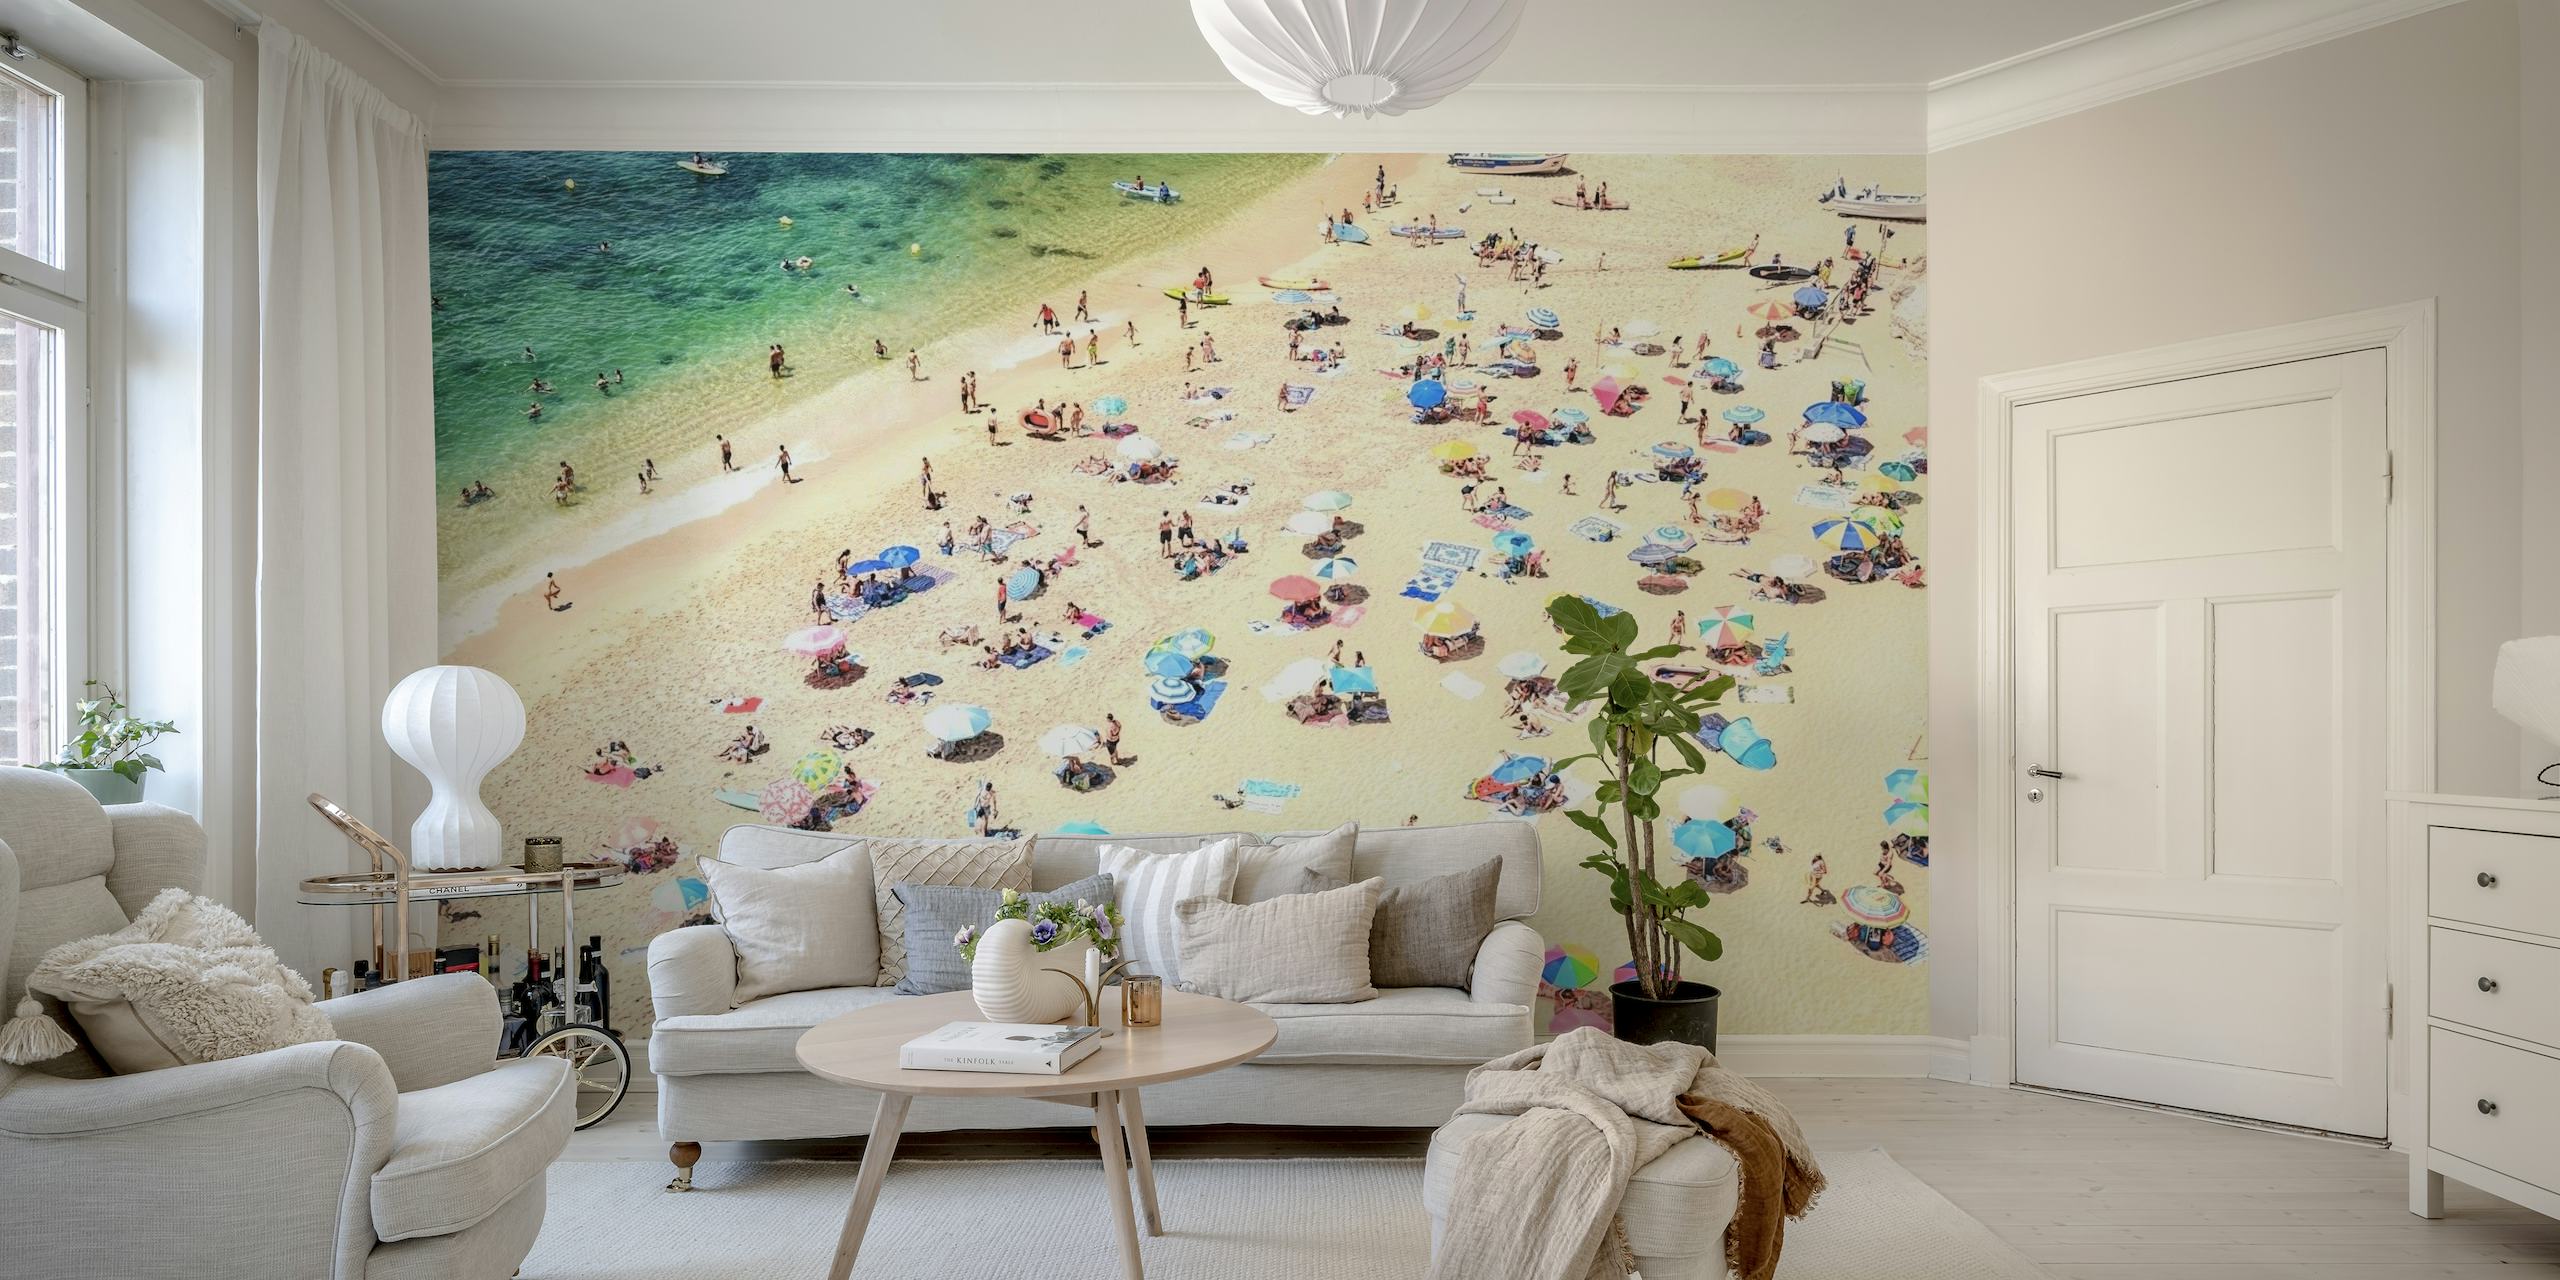 Aerial view of Benagil beach wall mural with sunbathers and colorful umbrellas